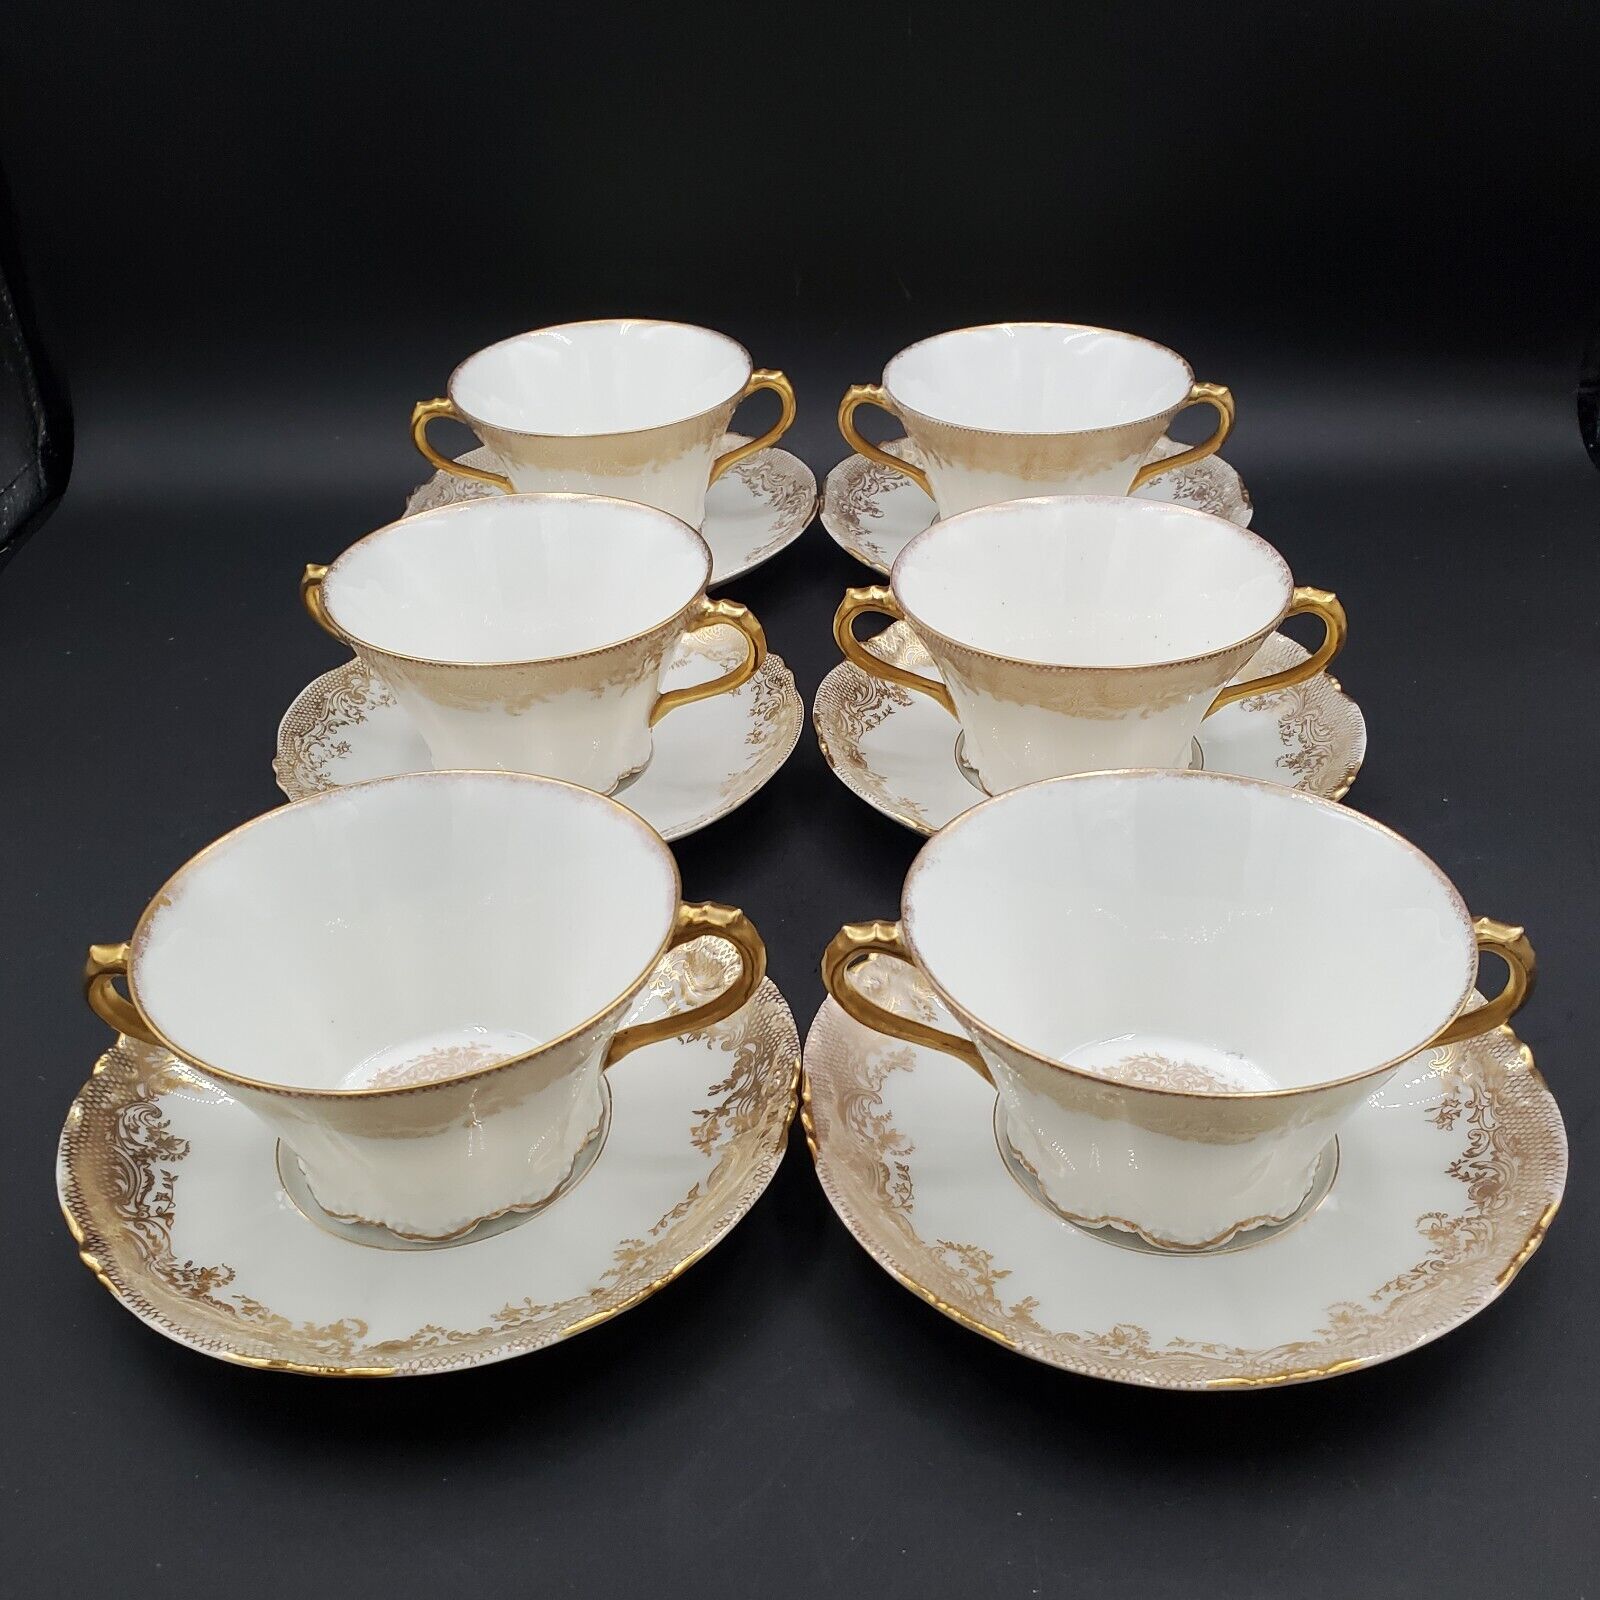 6 Sets VTG Theodore Haviland Limoges Gilded Tea Cups and Saucers Made in France